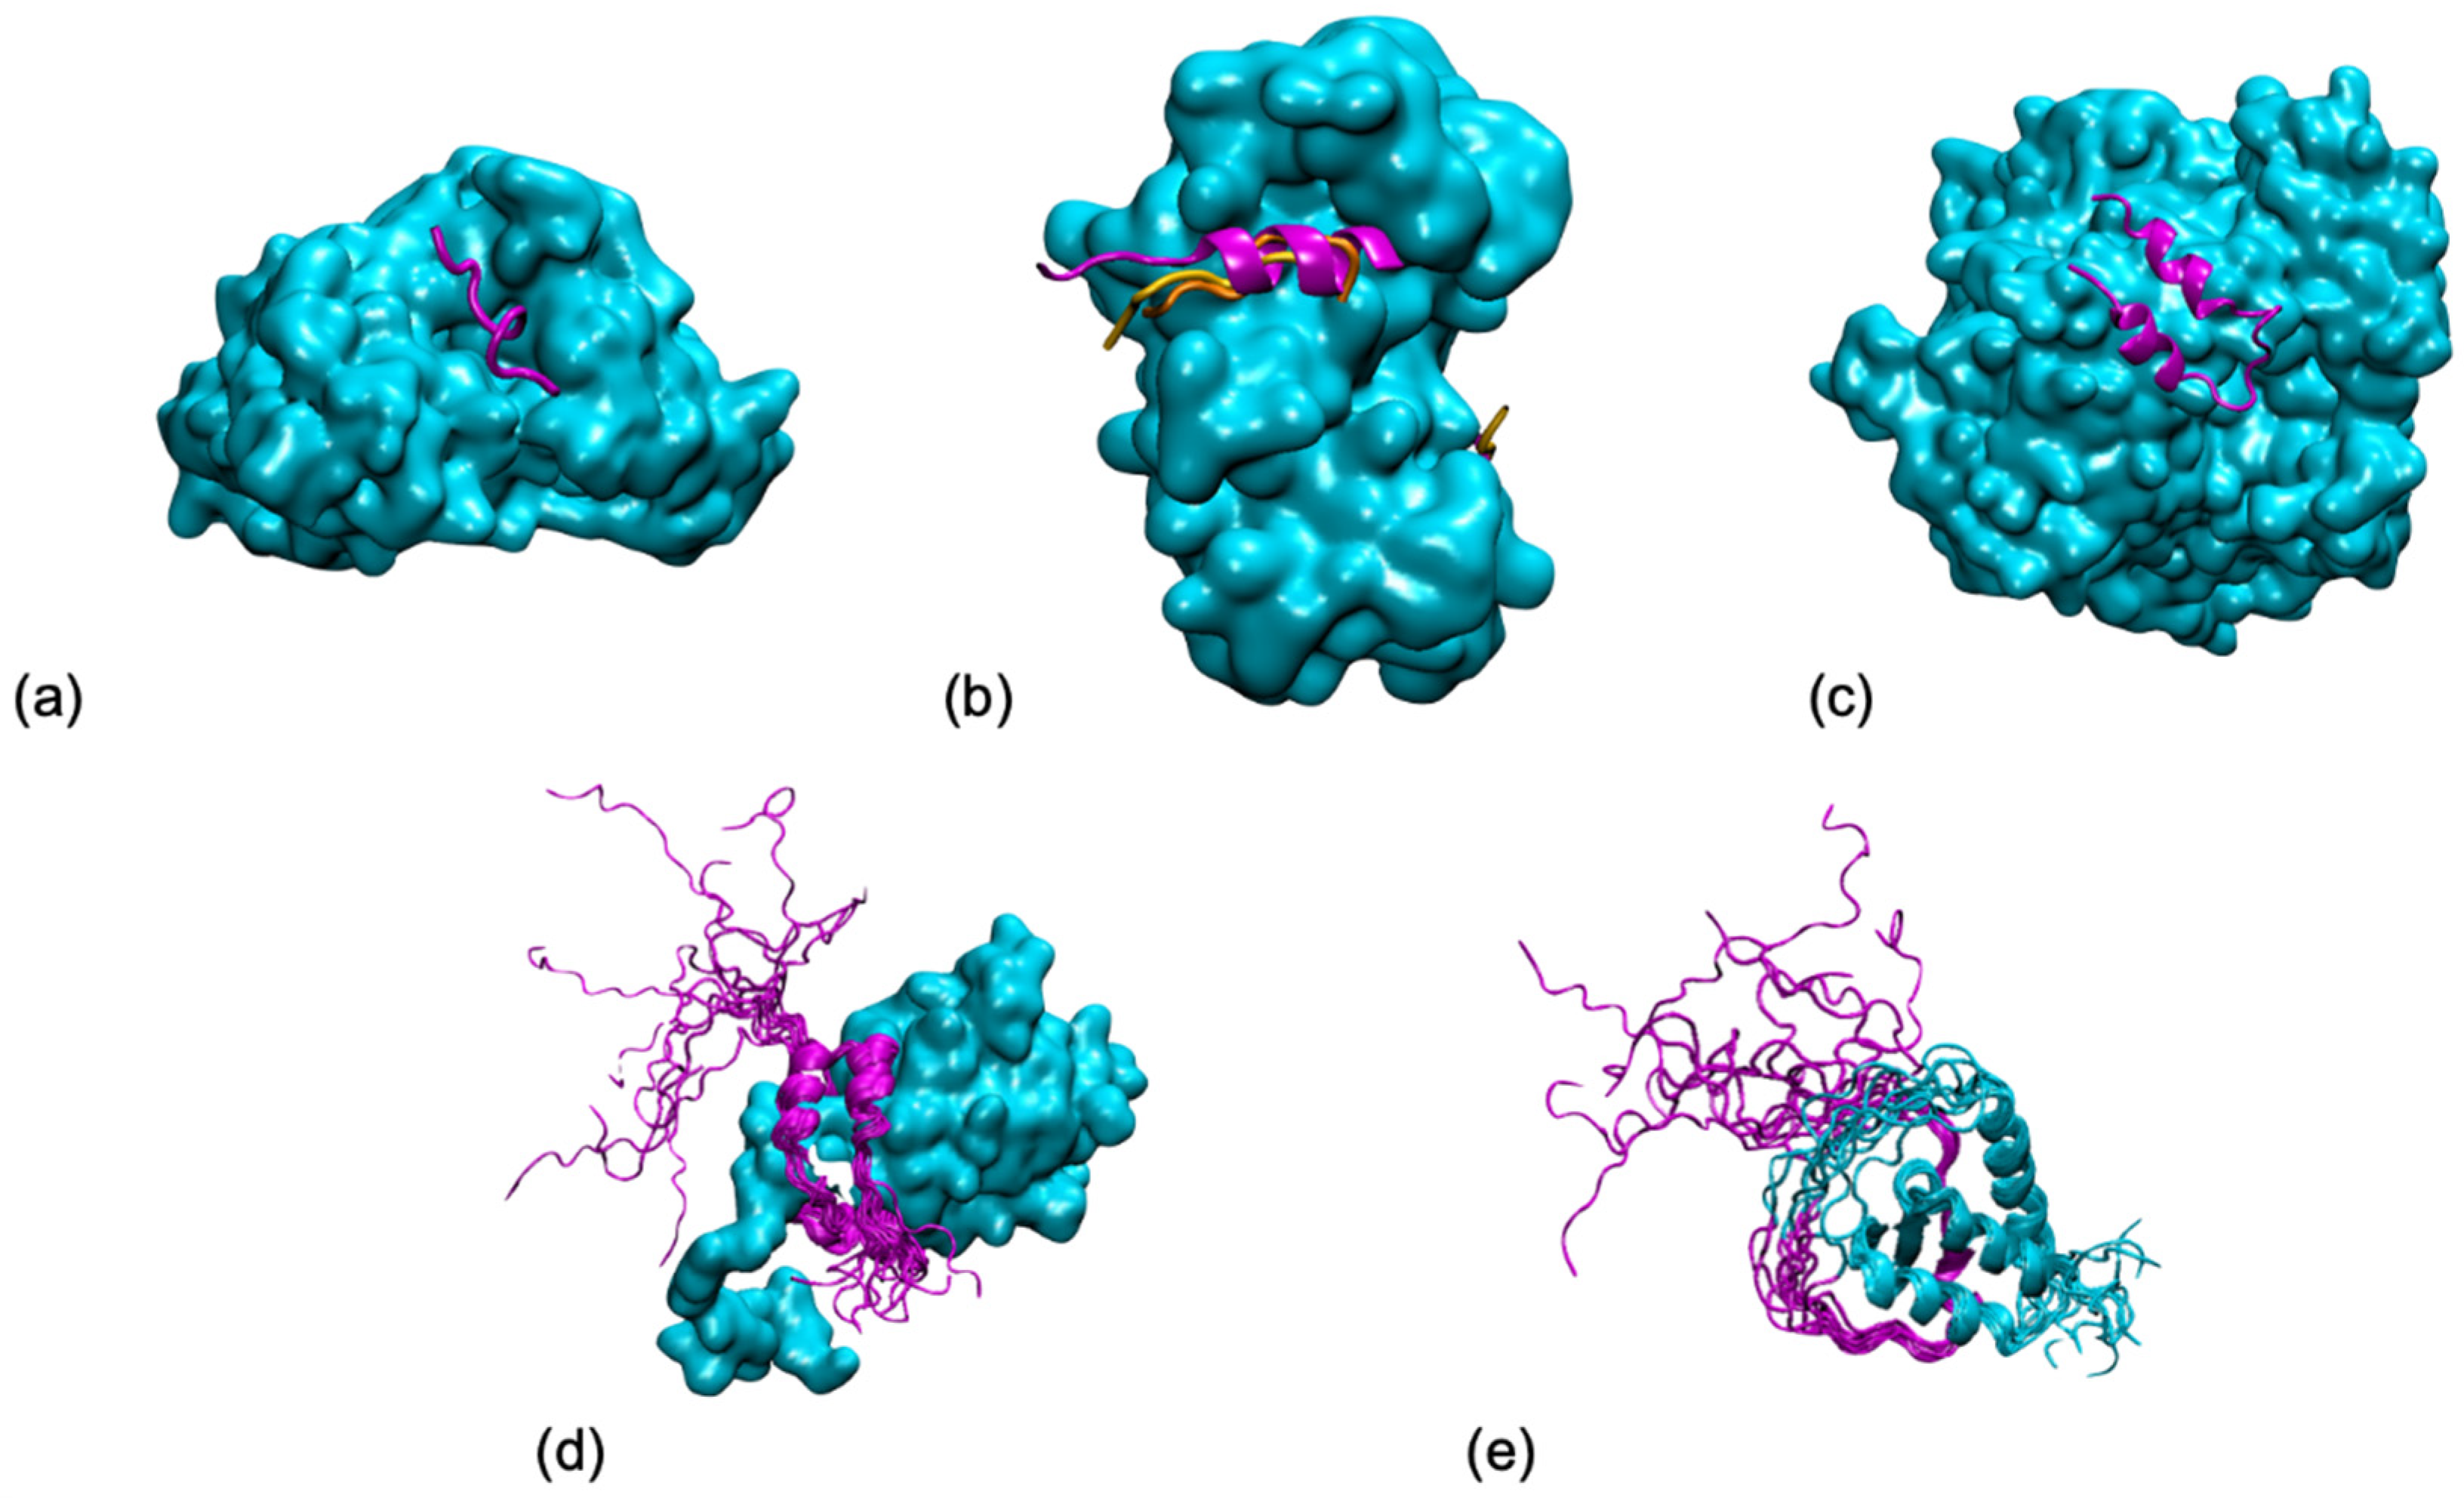 Biomolecules | Free Full-Text | When Order Meets Disorder: Modeling and  Function of the Protein Interface in Fuzzy Complexes